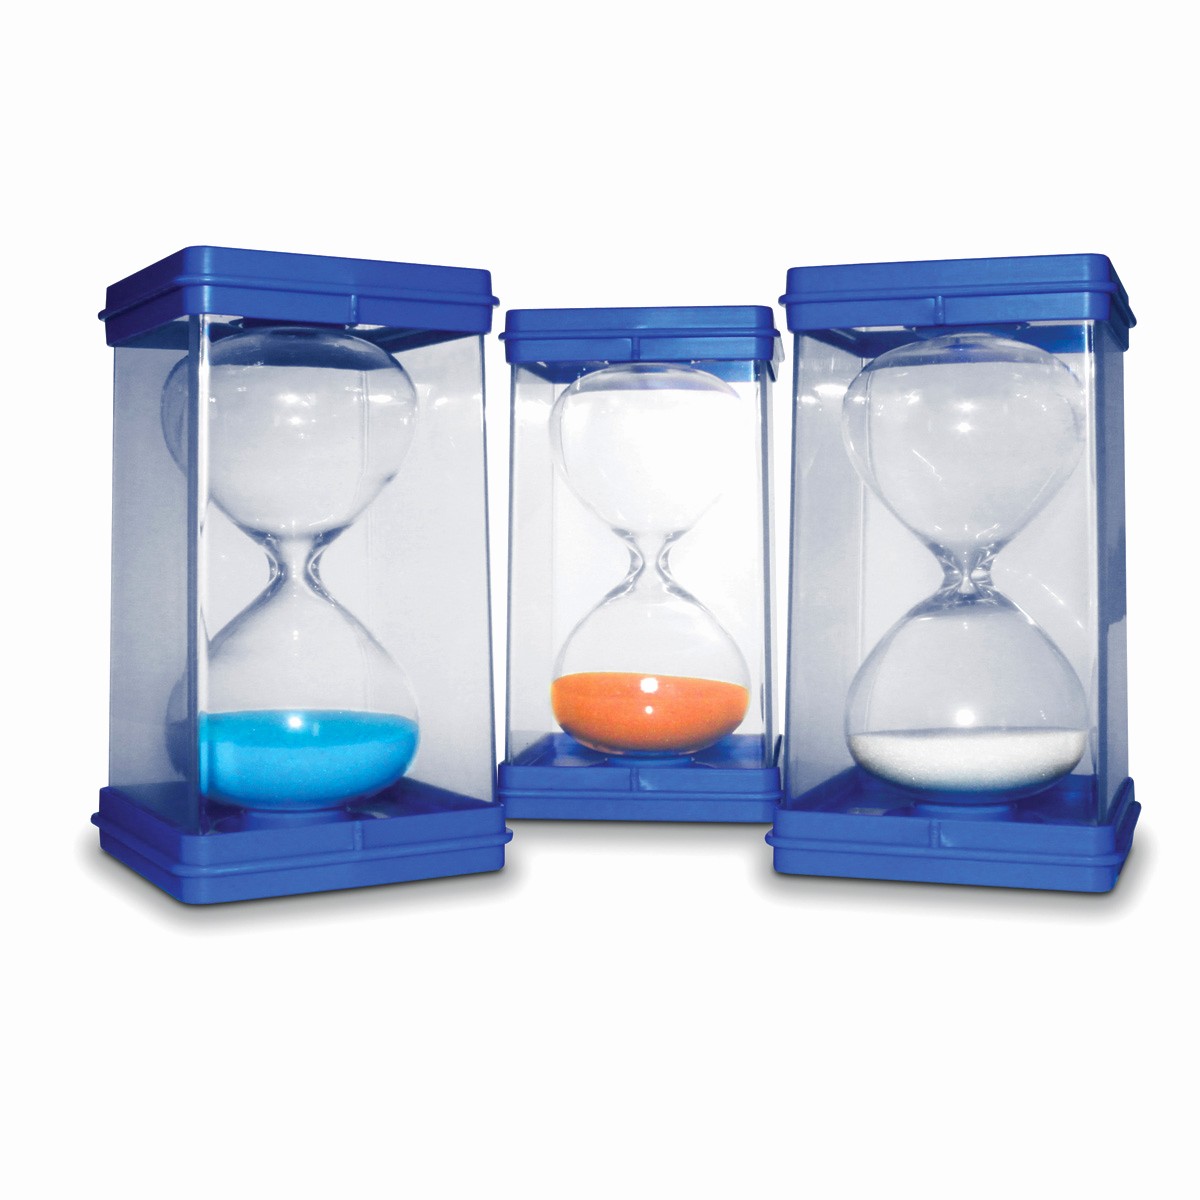 Set Stopwatch for 5 Minutes New Buy Invicta Sand Timers Set Of 3 30 Seconds 1